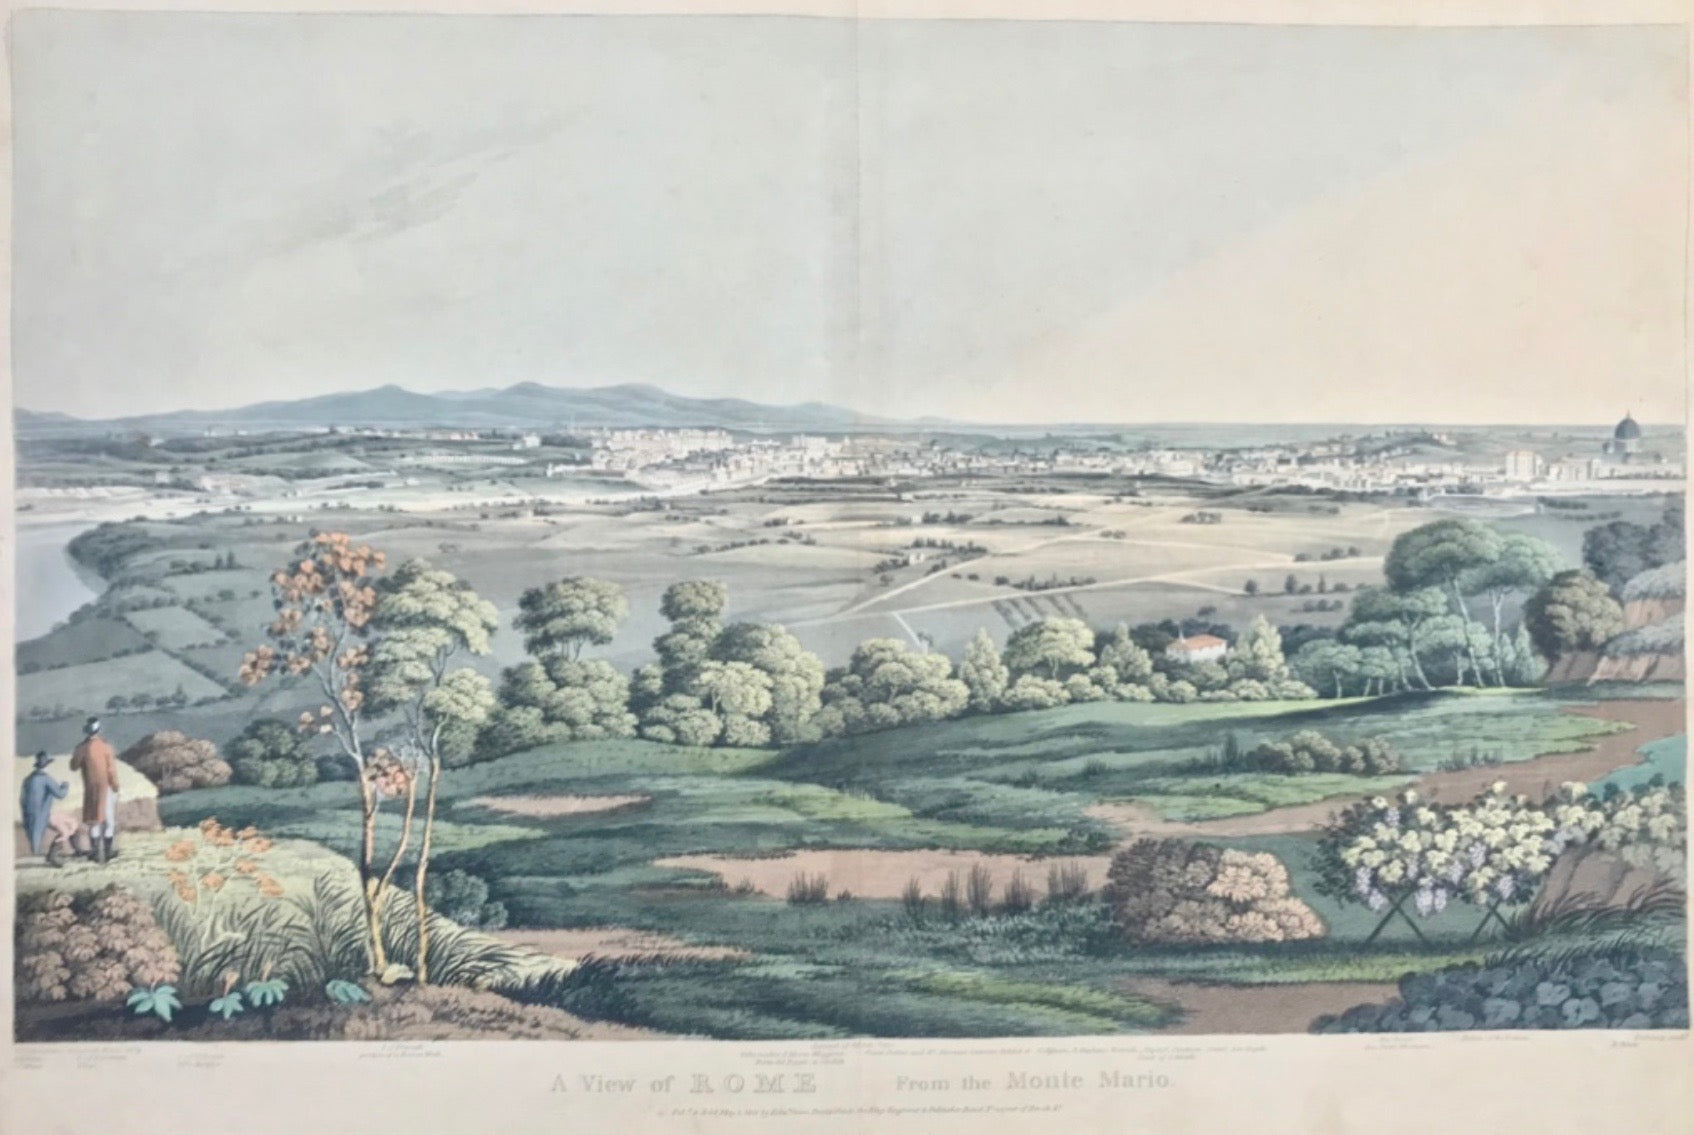 "A View of Rome From the Monte Mario"  Aquatinta by Matthew Dubourg (1786-1838)  After the drawing by J. J. Middleton  Published in: "Grecian Remains in Italy, a description of Cyclopean Walls , and of Roman Antiquities with Topographical and Picturesque Views of Ancient Latium"  By Edward Orme  London, 1812  One of altogether 4 originally hand-colored views  The "Eternal City" - Rome - in the distance, seen from Monte Mario, located in the N.W. of Rome.